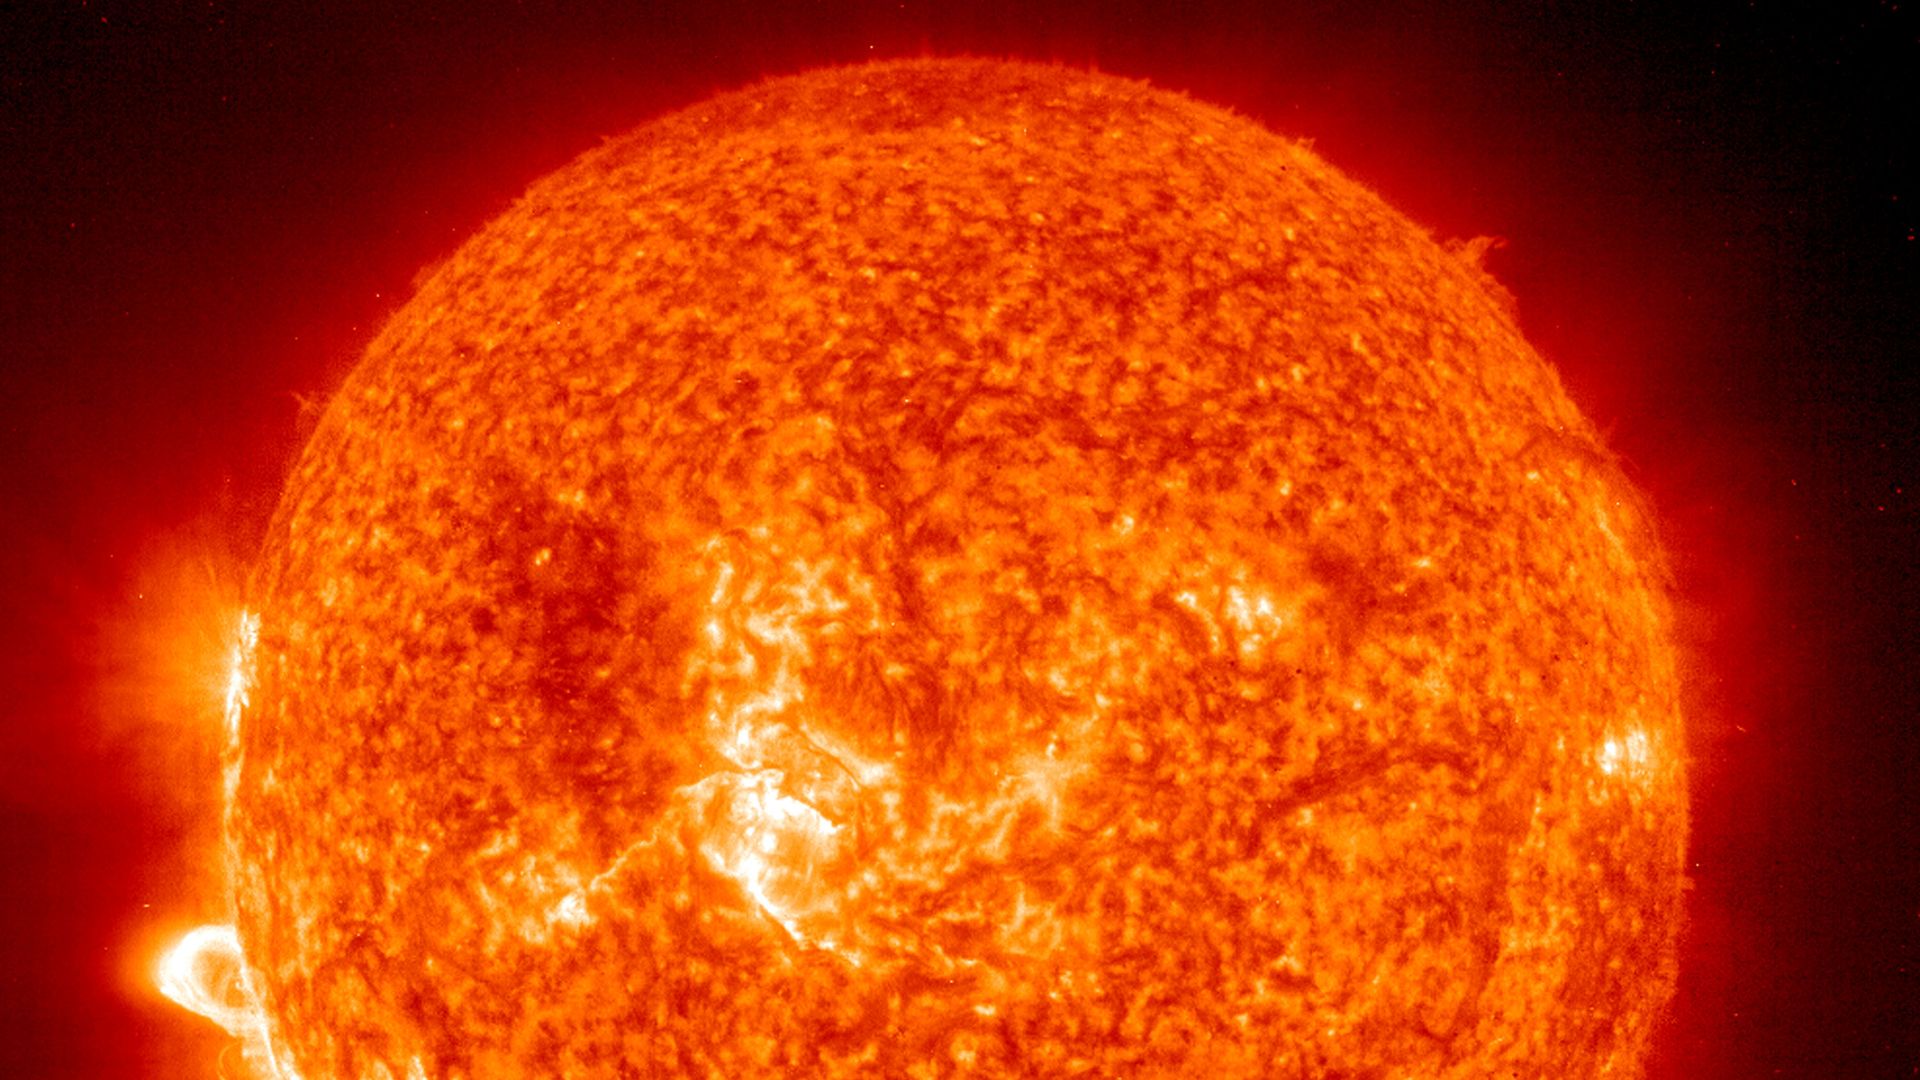 This image shows the sun from a distance, with flare-ups on its lower left side.